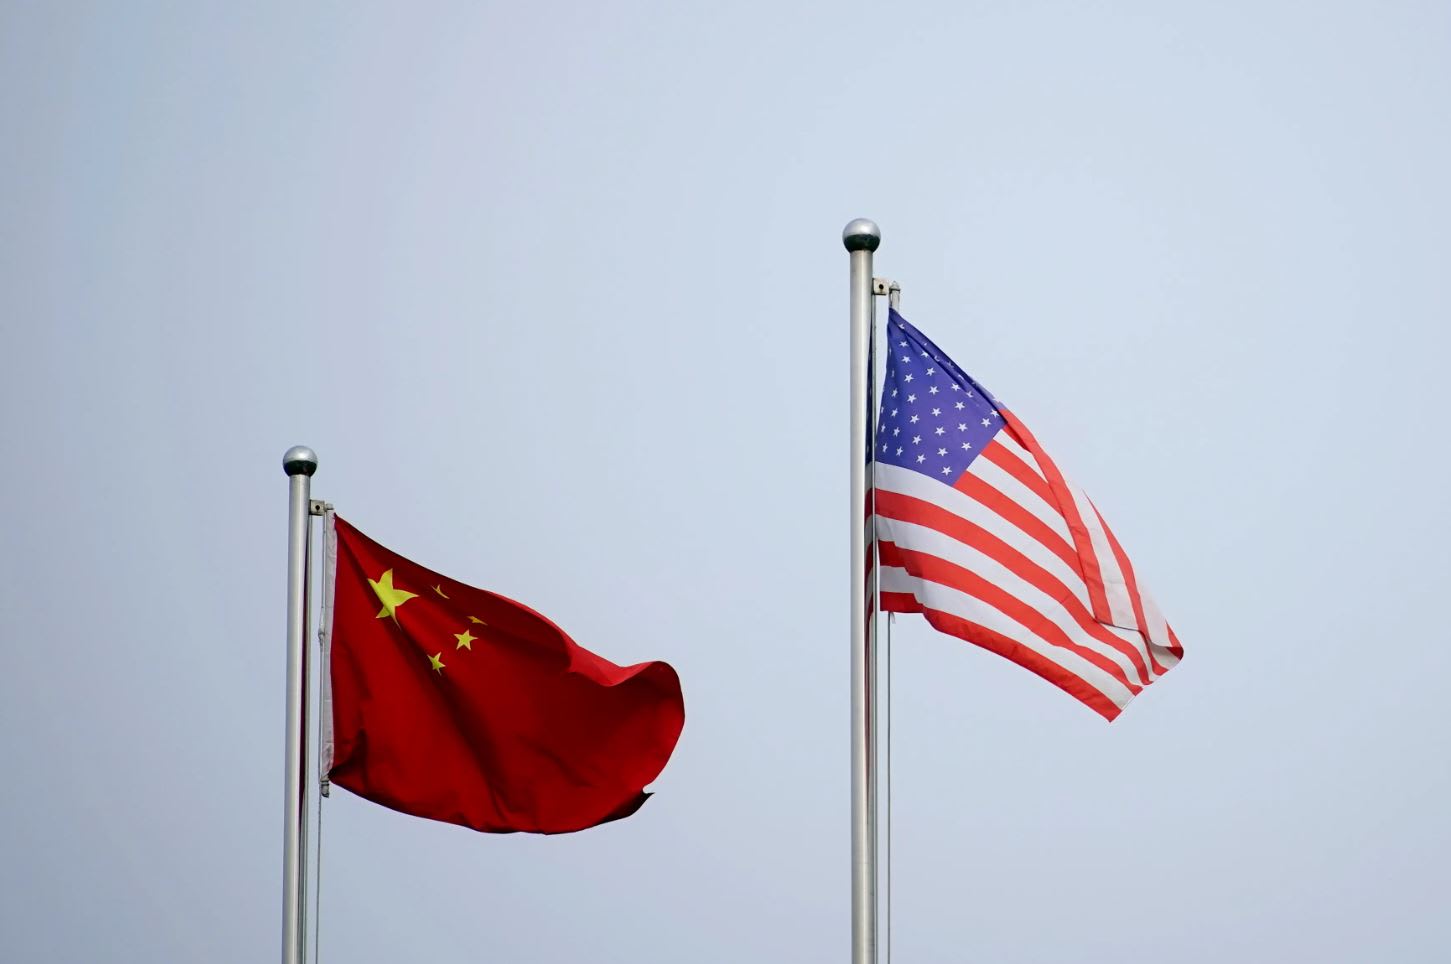 Chinese and US flags flutter outside a company building in Shanghai, China on April 14, 2021. 

